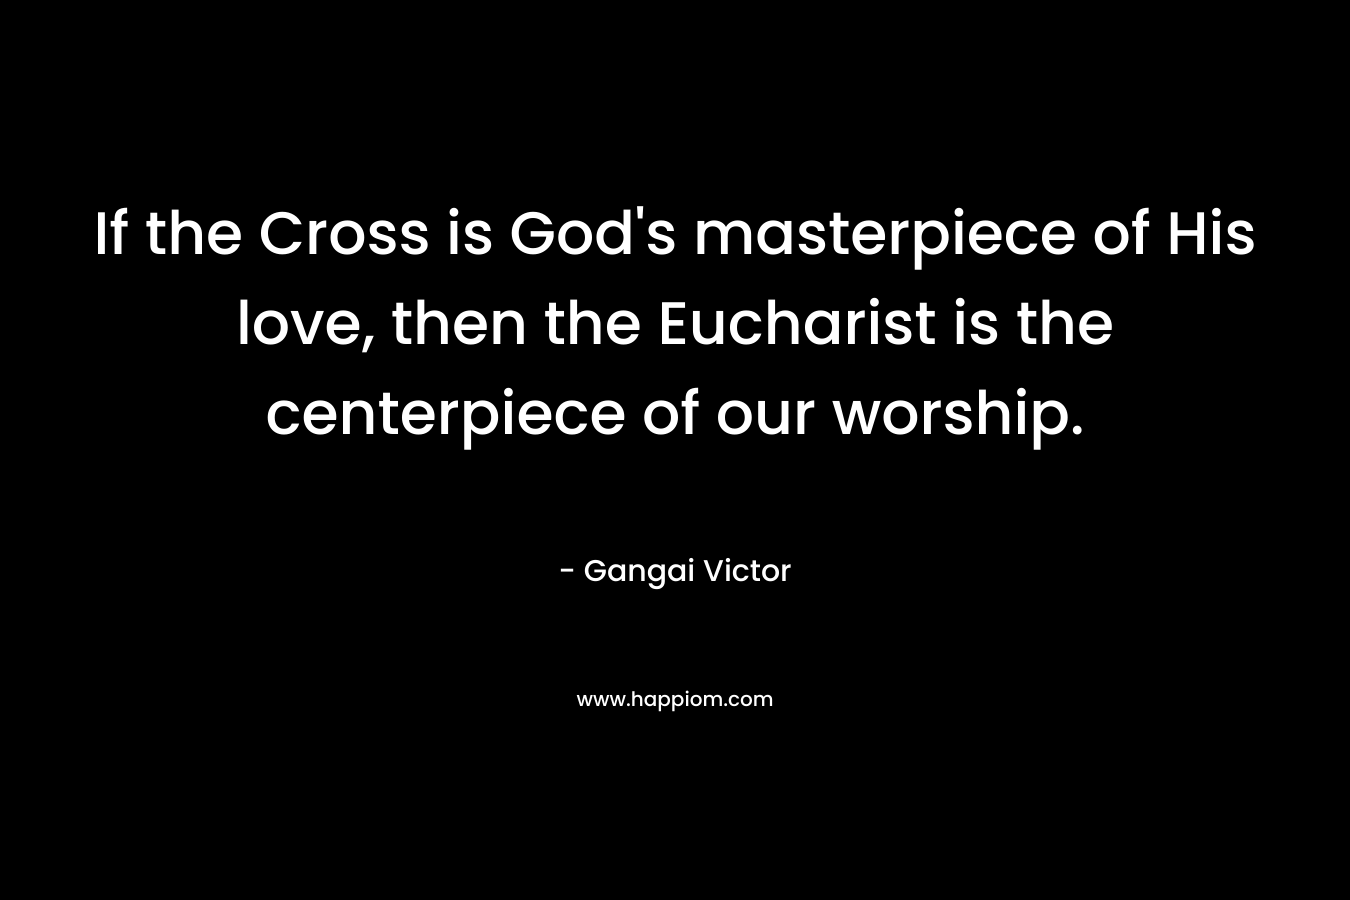 If the Cross is God’s masterpiece of His love, then the Eucharist is the centerpiece of our worship. – Gangai Victor